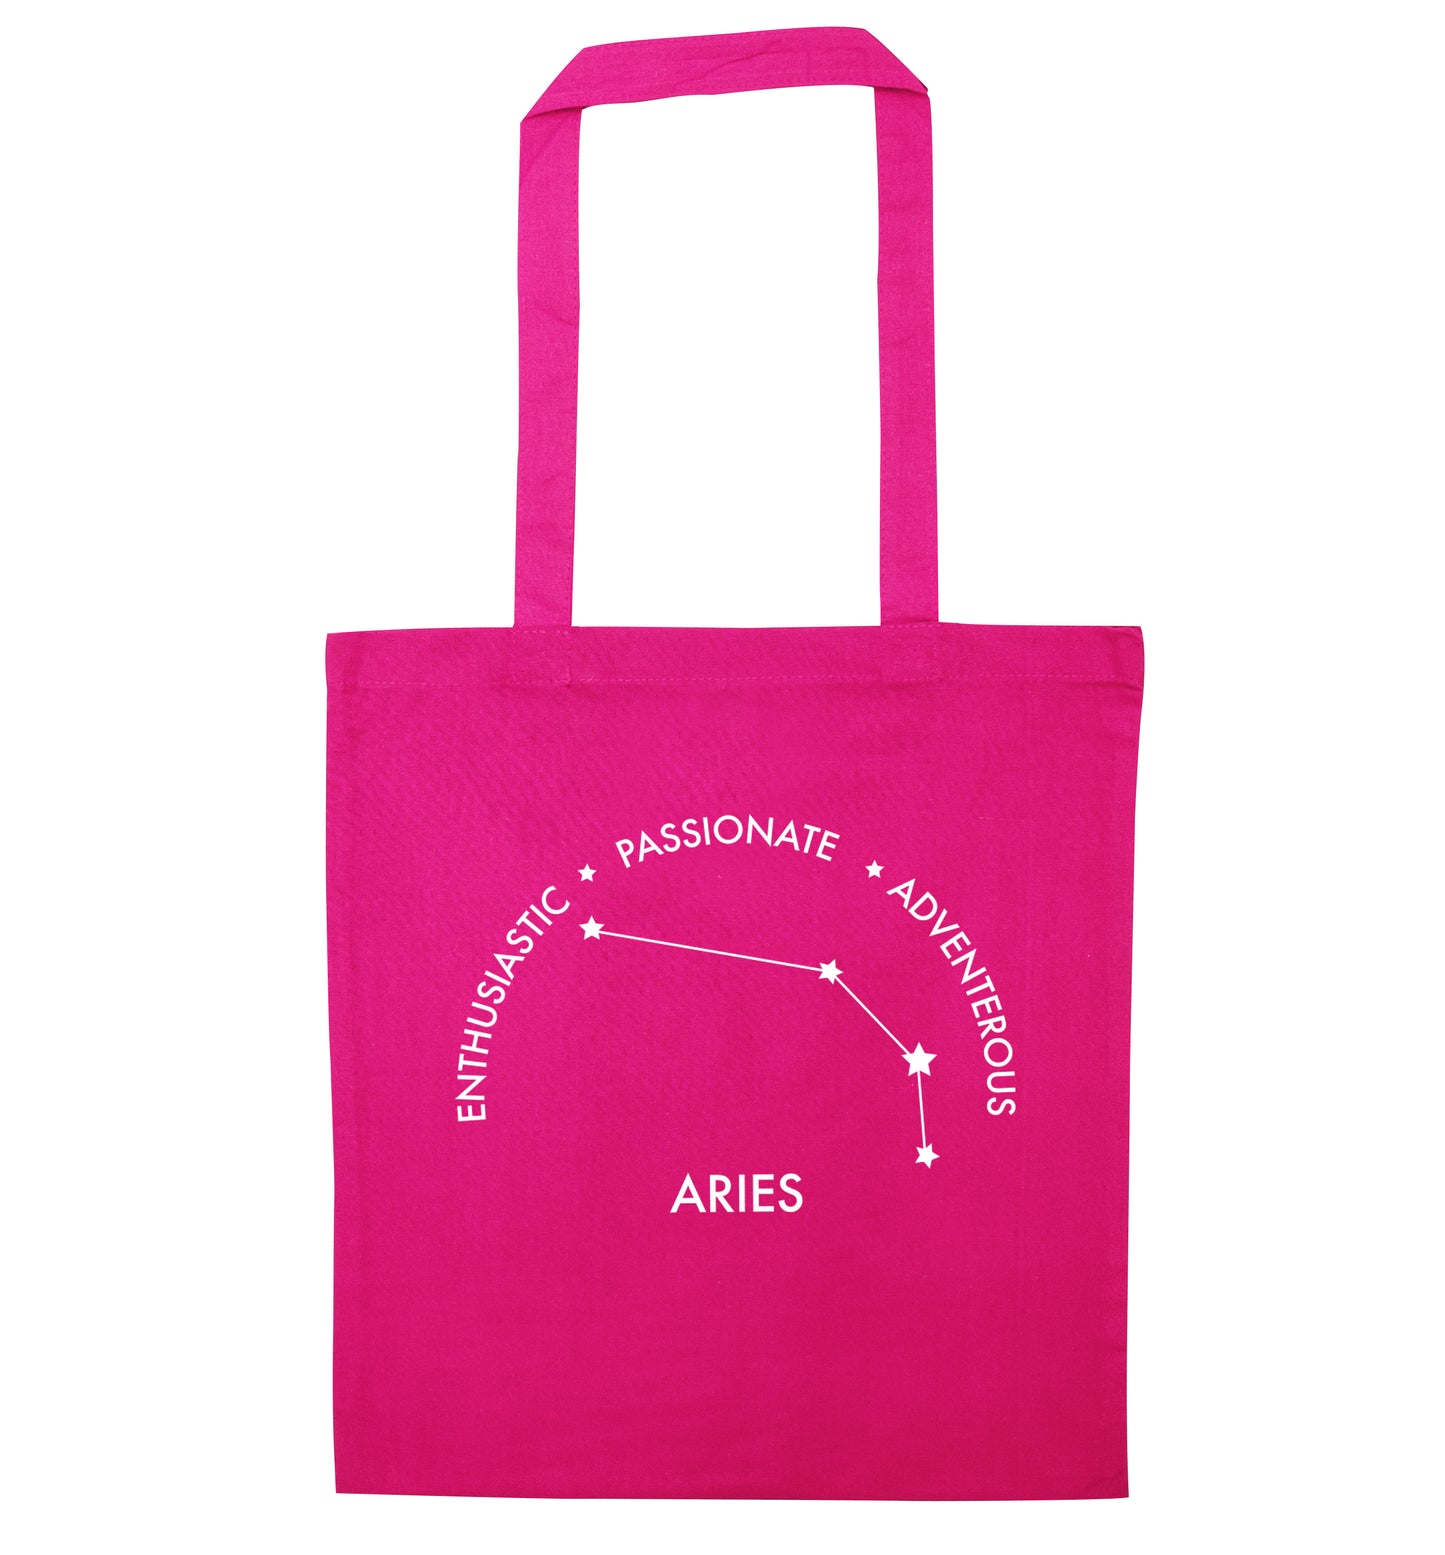 Aries enthusiastic | passionate | adventerous pink tote bag